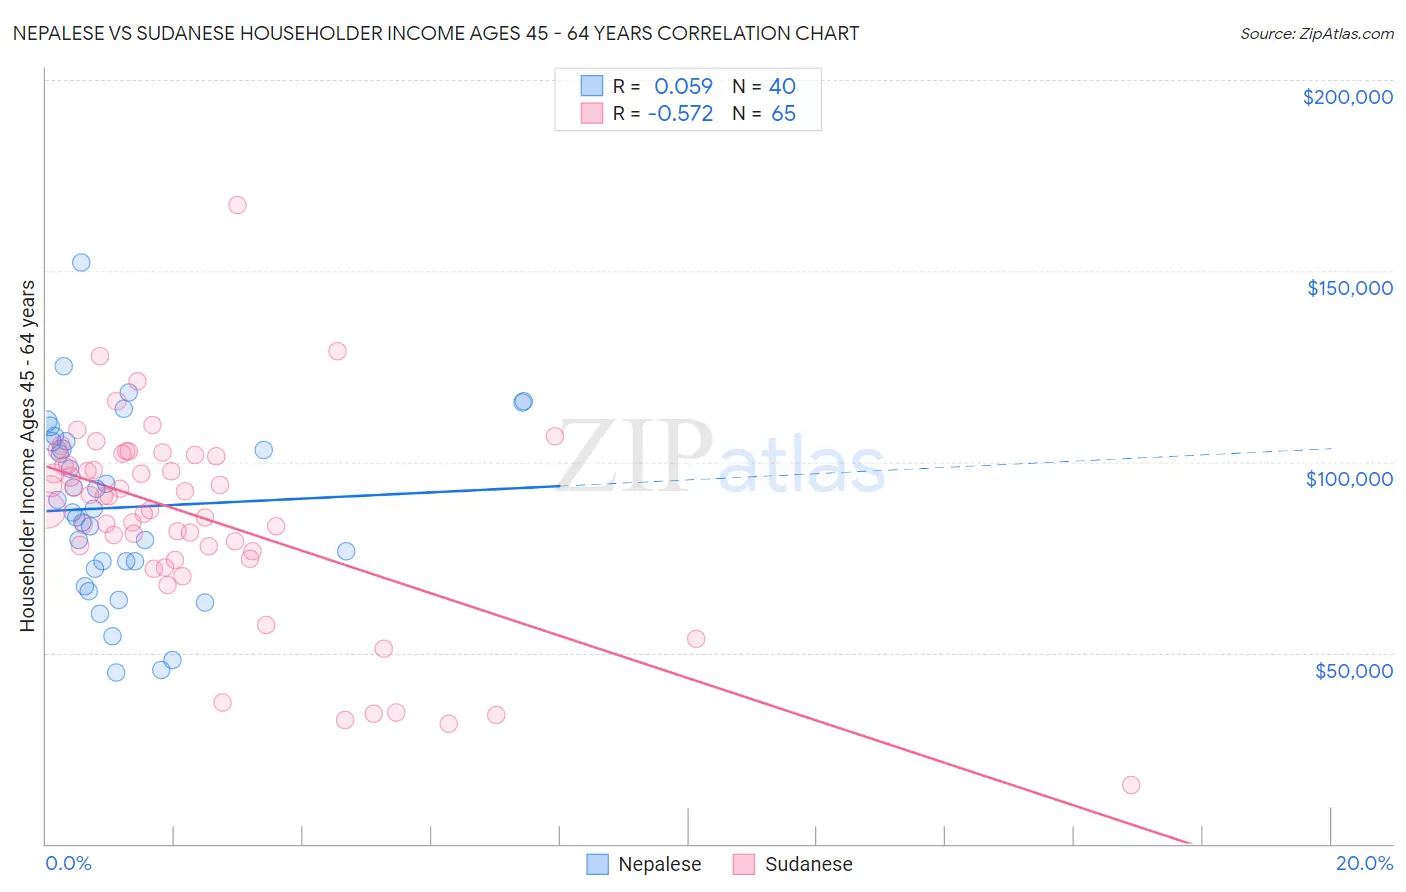 Nepalese vs Sudanese Householder Income Ages 45 - 64 years